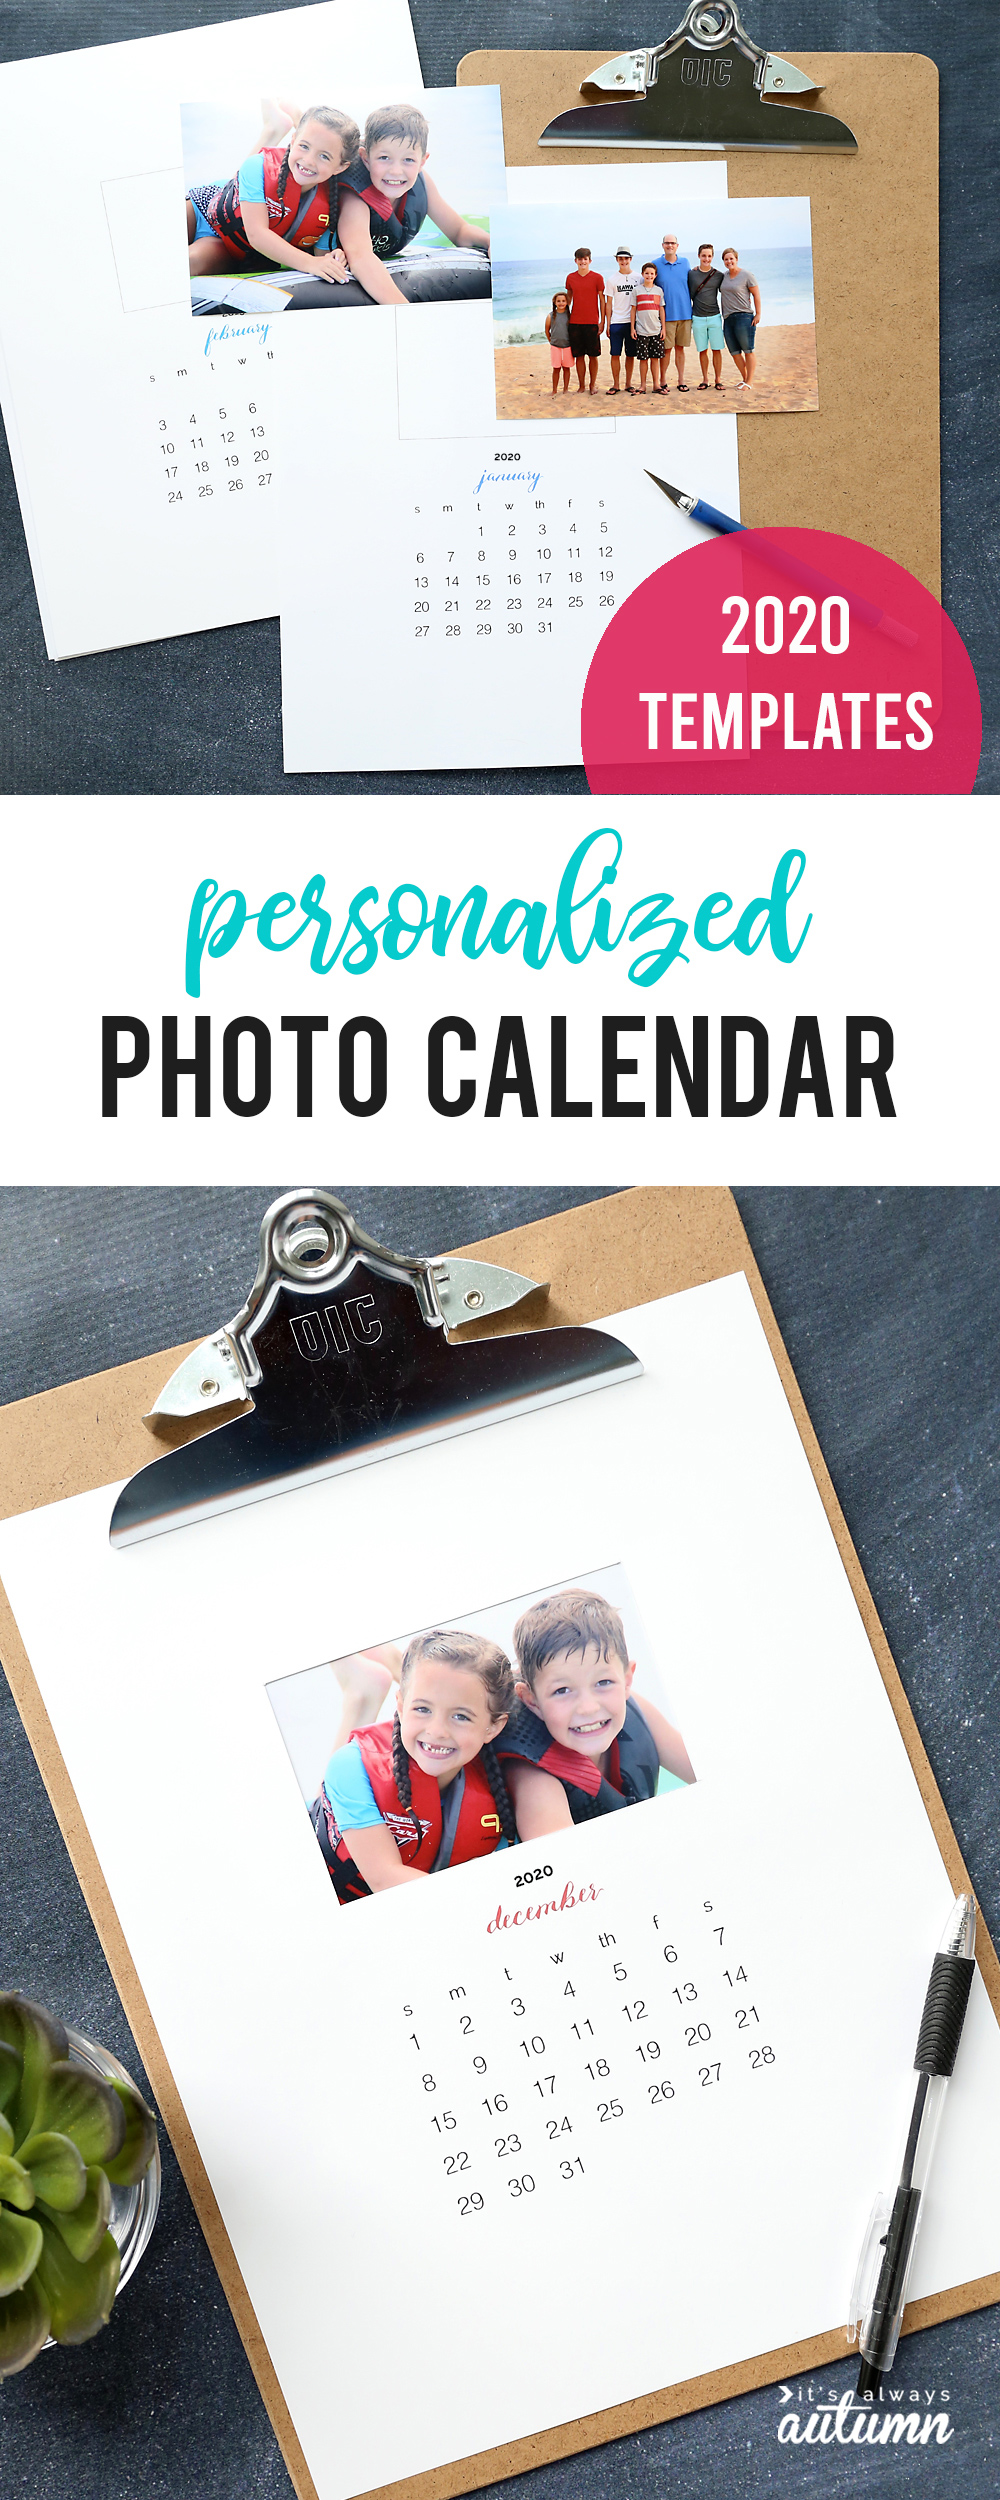 Personalized photo calendar with free 2020 printable templates